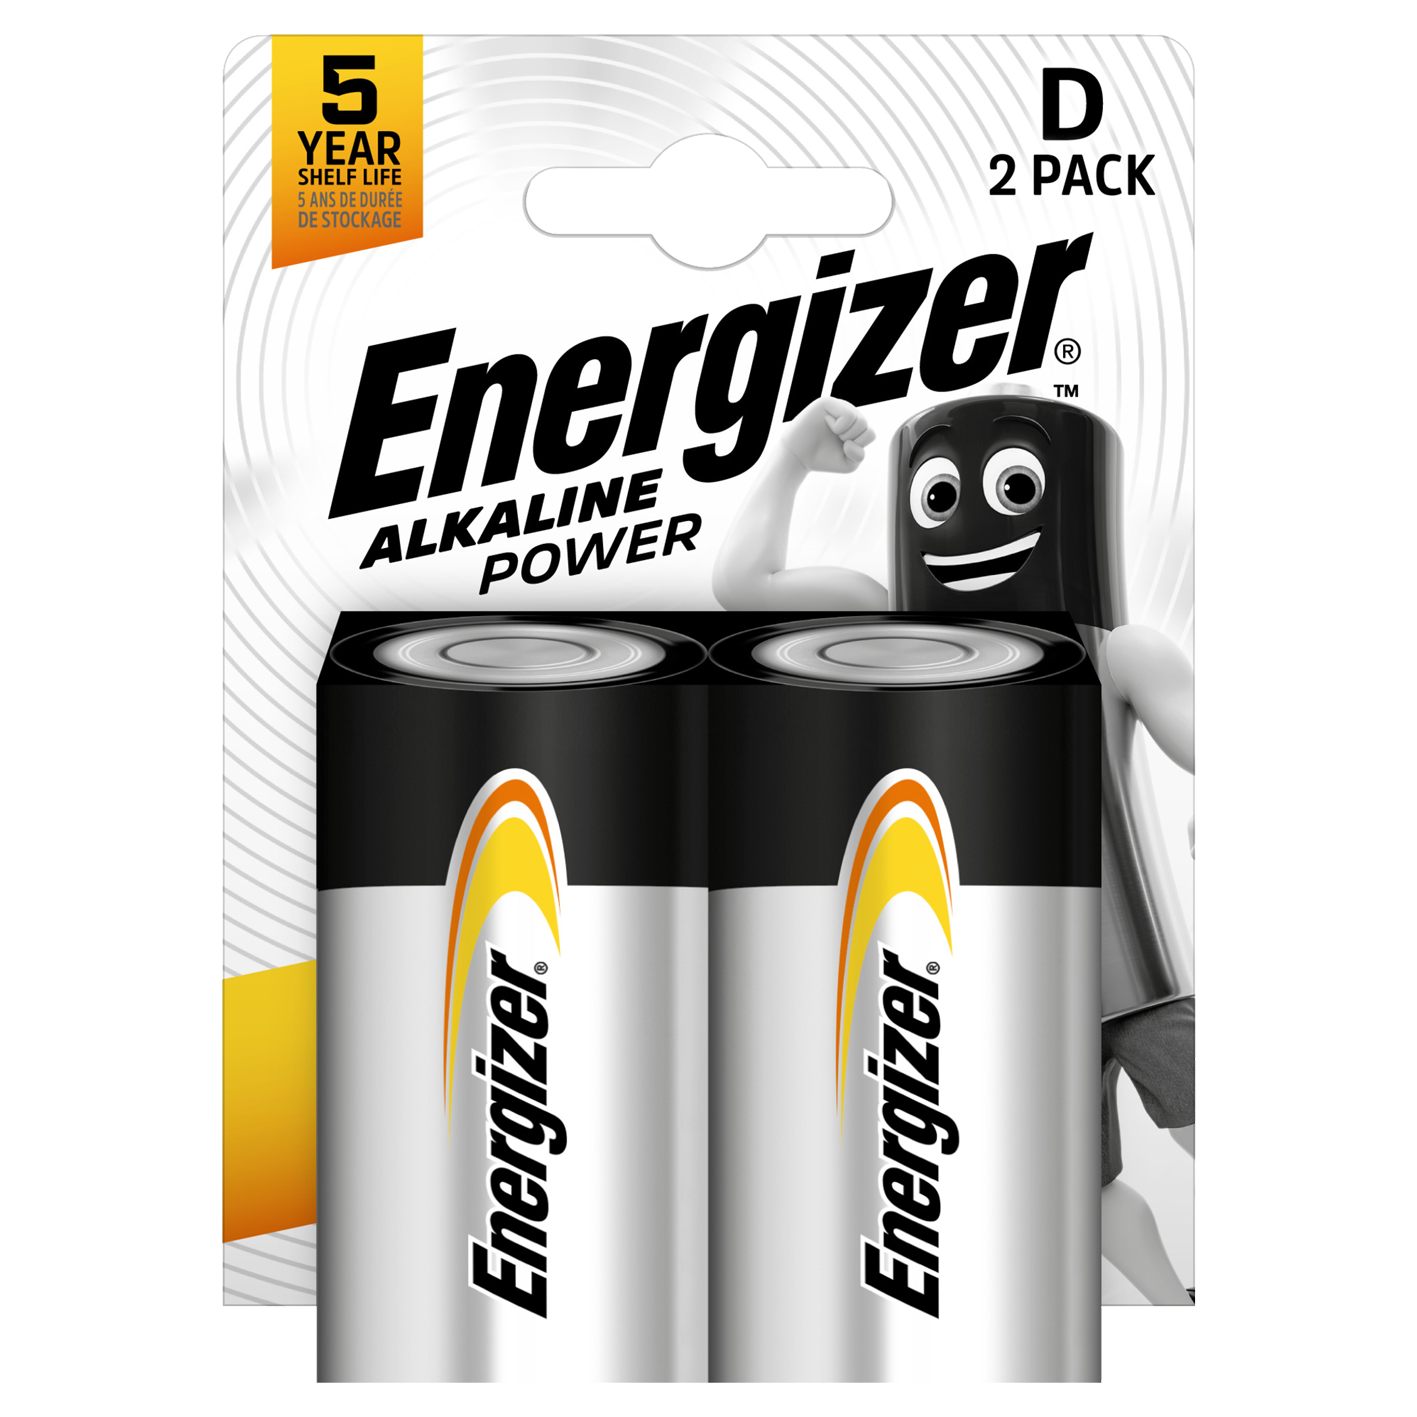 Energizer D Size Alkaline Power, Pack of 2